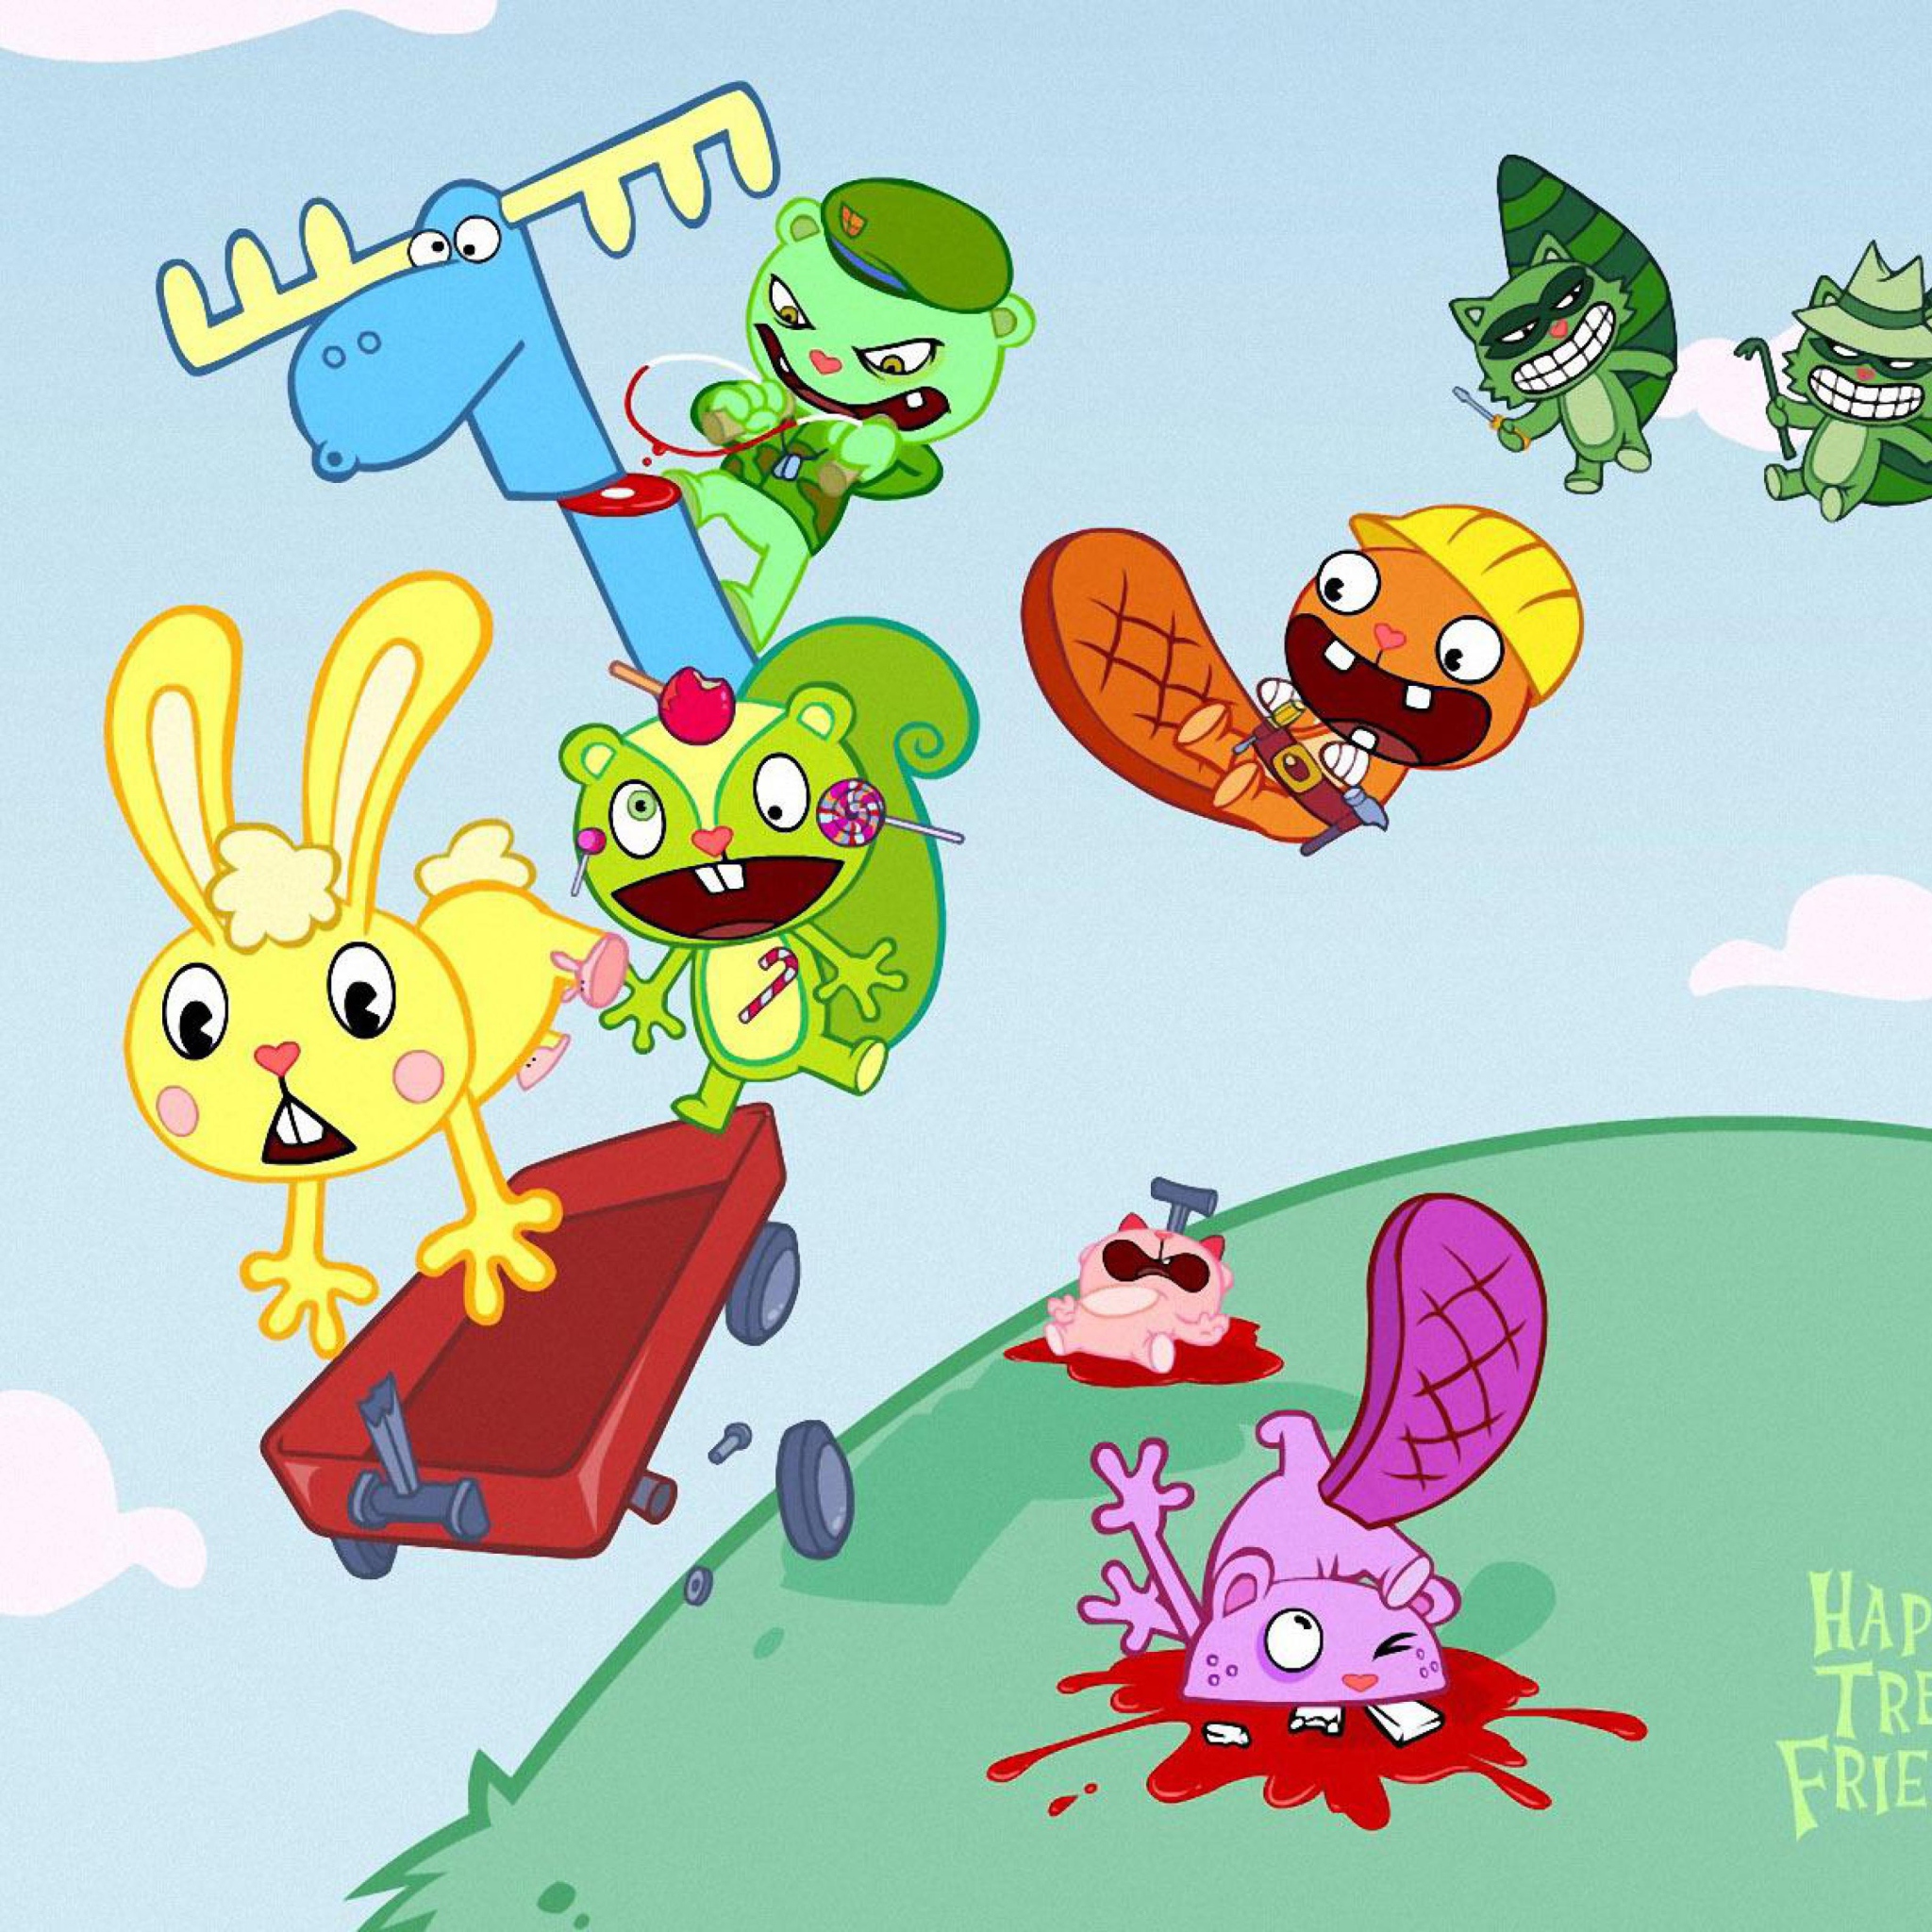 Happy tree friends images